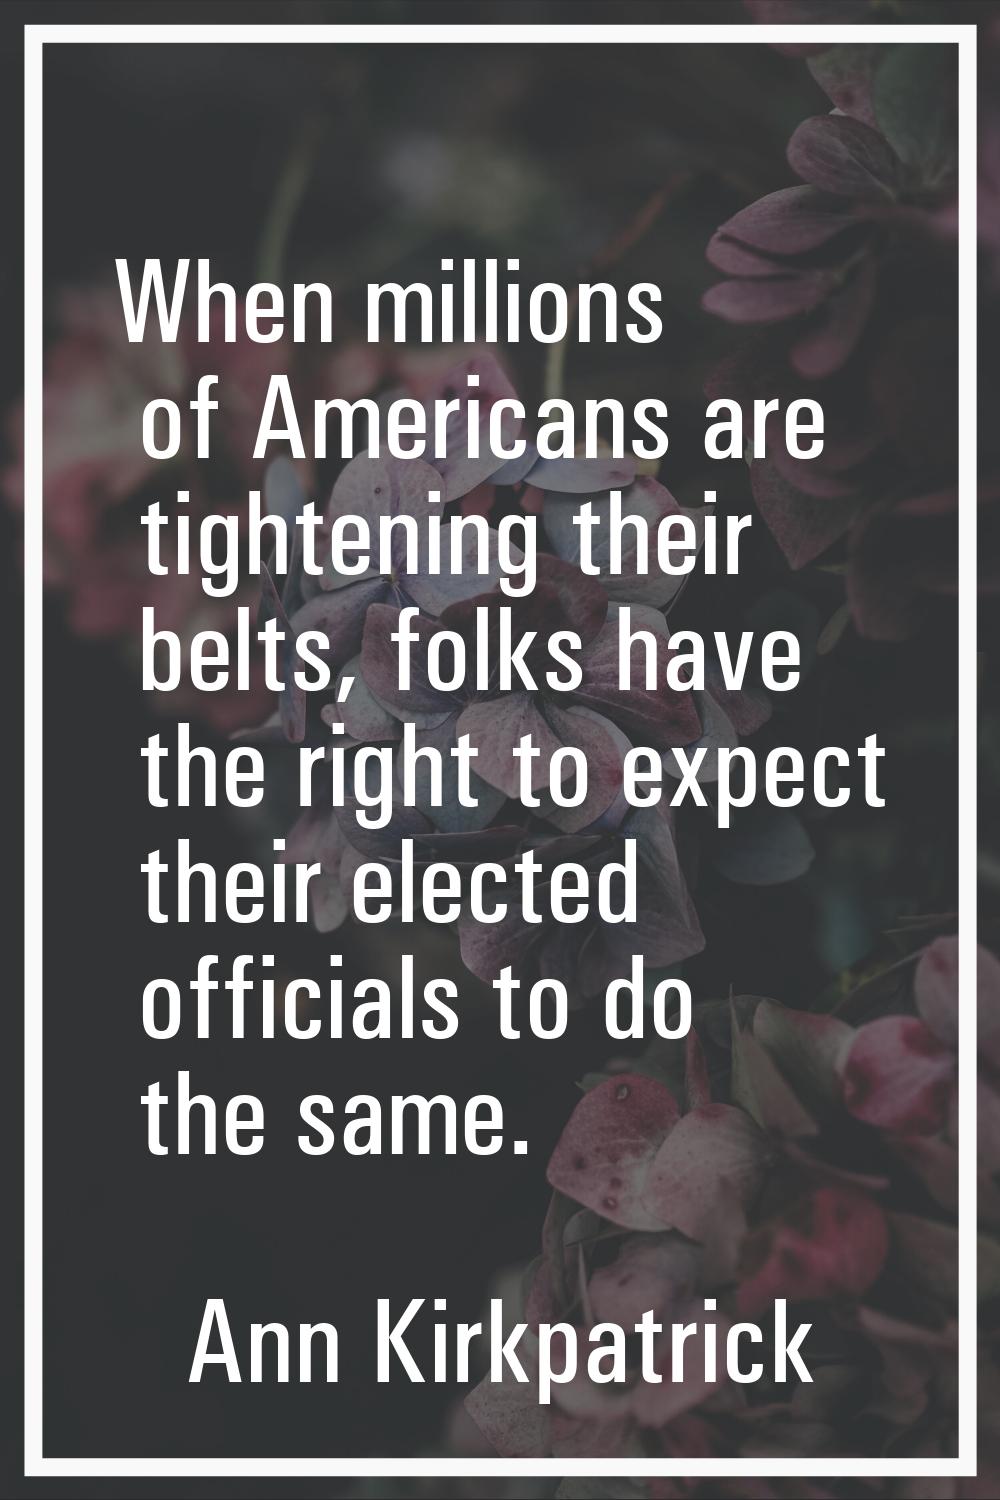 When millions of Americans are tightening their belts, folks have the right to expect their elected